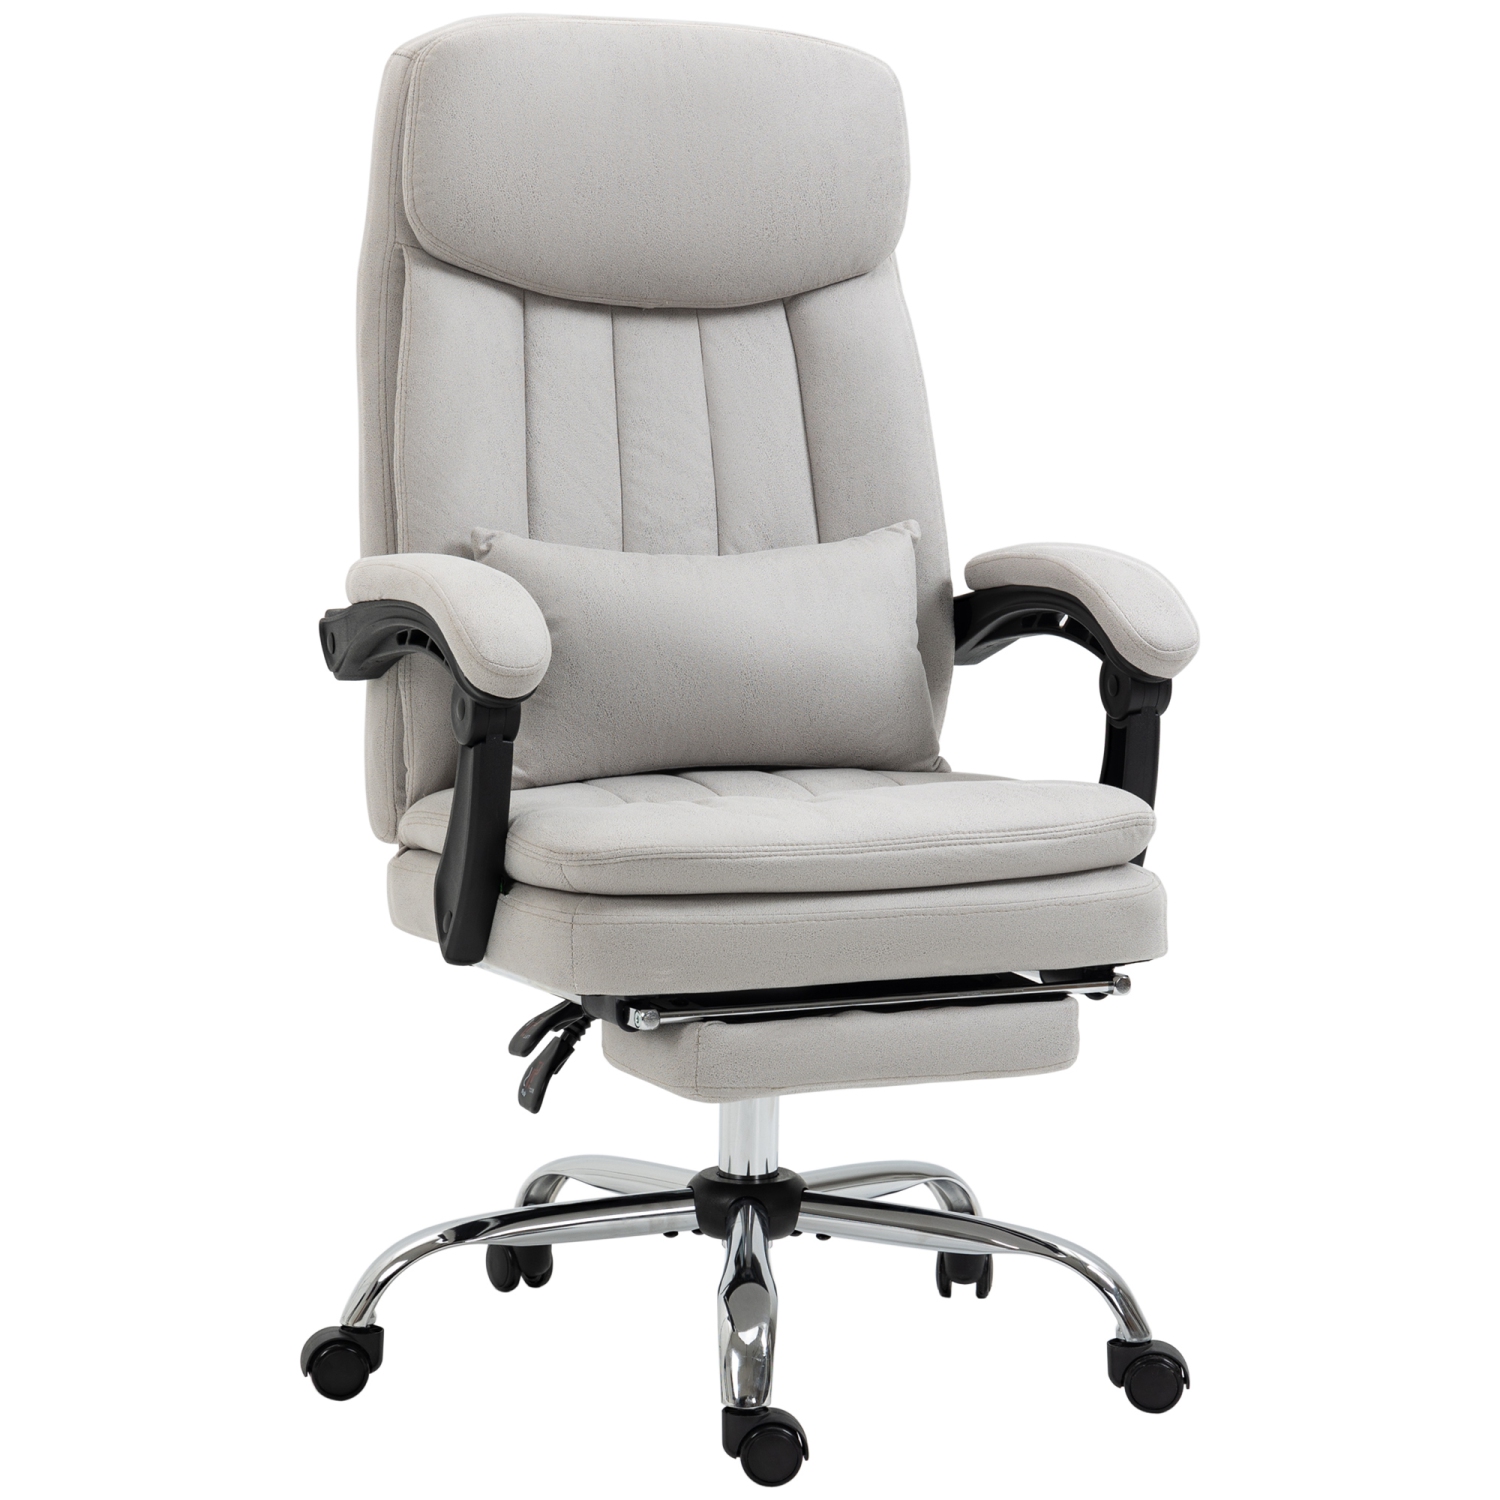 Vinsetto High Back Office Chair, Microfibre Computer Desk Chair with Lumbar Support Pillow, Foot Rest, Reclining Back, Arm, Light Grey